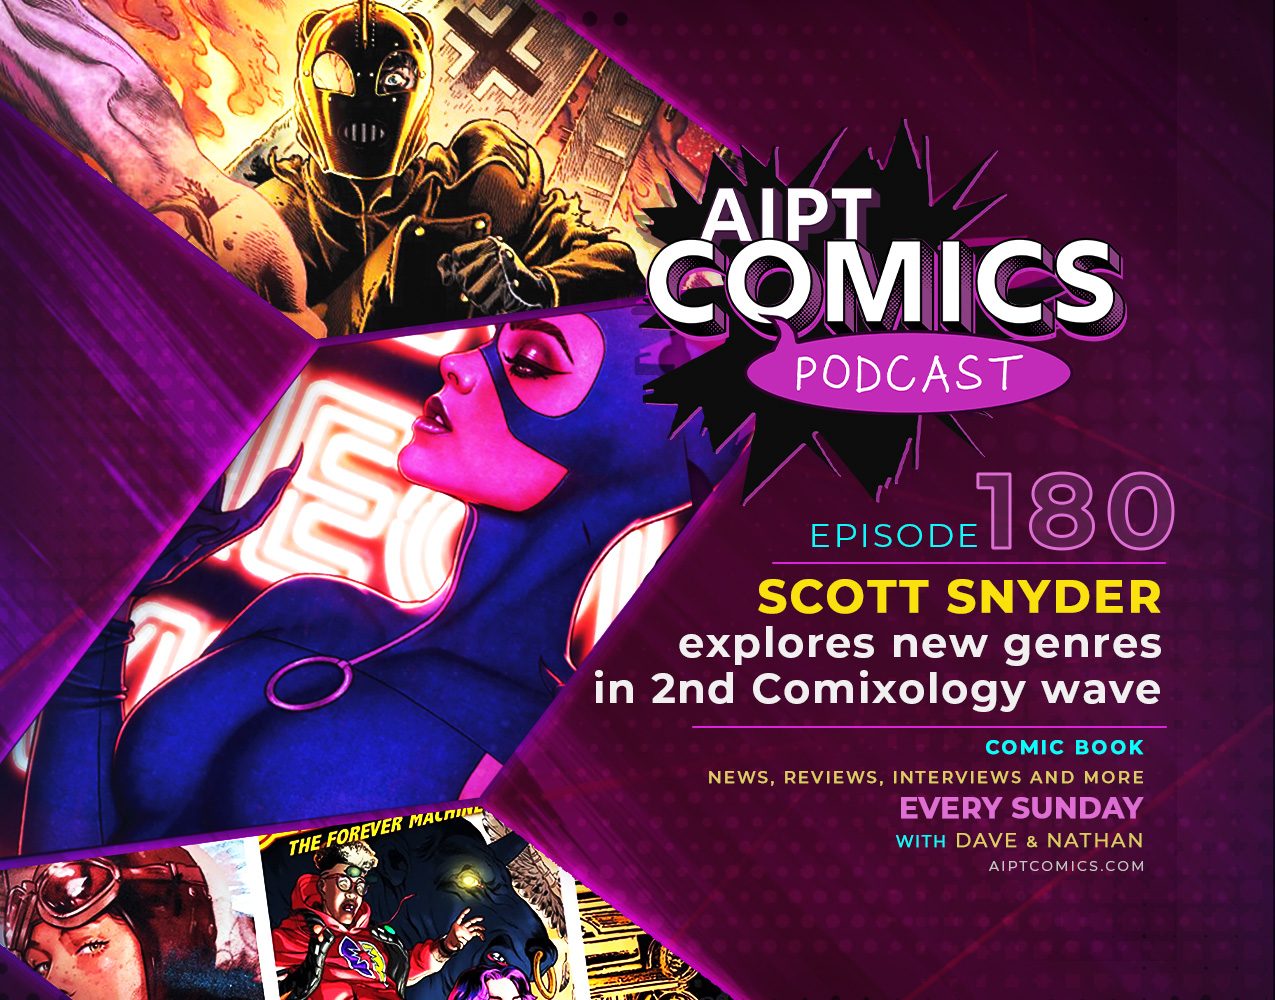 AIPT Comics Podcast Episode 180: Scott Snyder explores new genres in 2nd Comixology wave